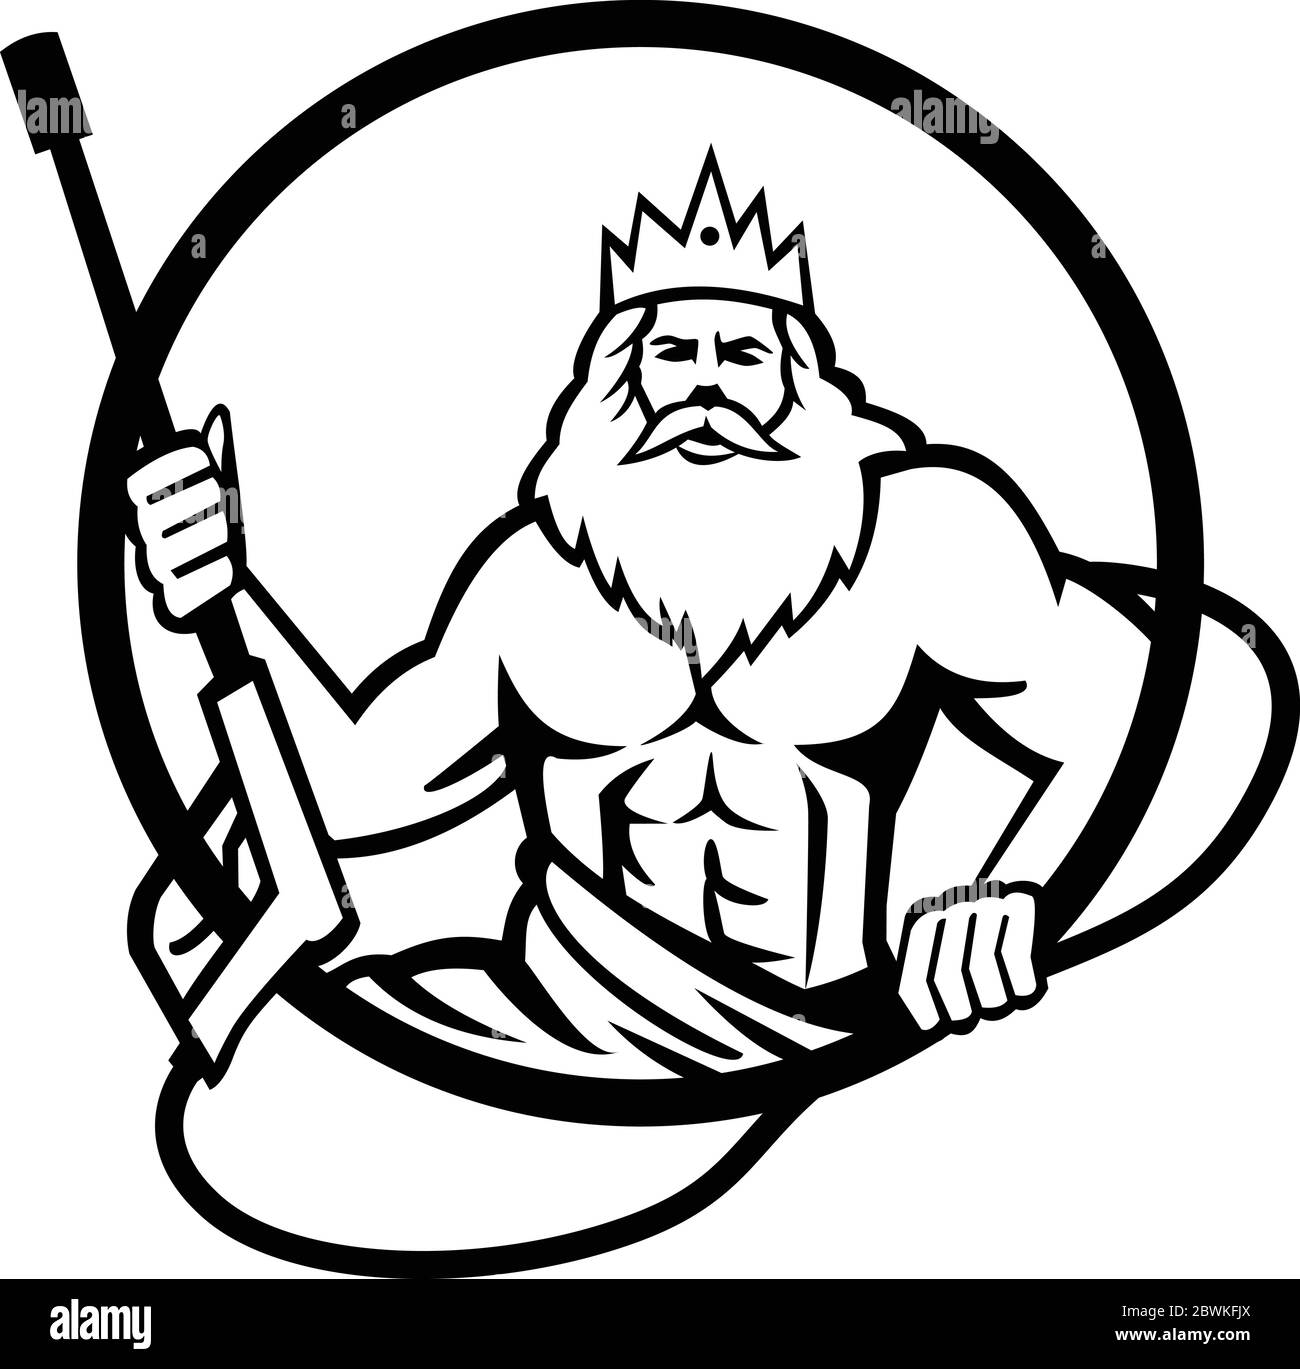 Illustration of Neptune, roman god of sea holding pressure power washer water blaster viewed from front set inside circle on isolated background done Stock Vector